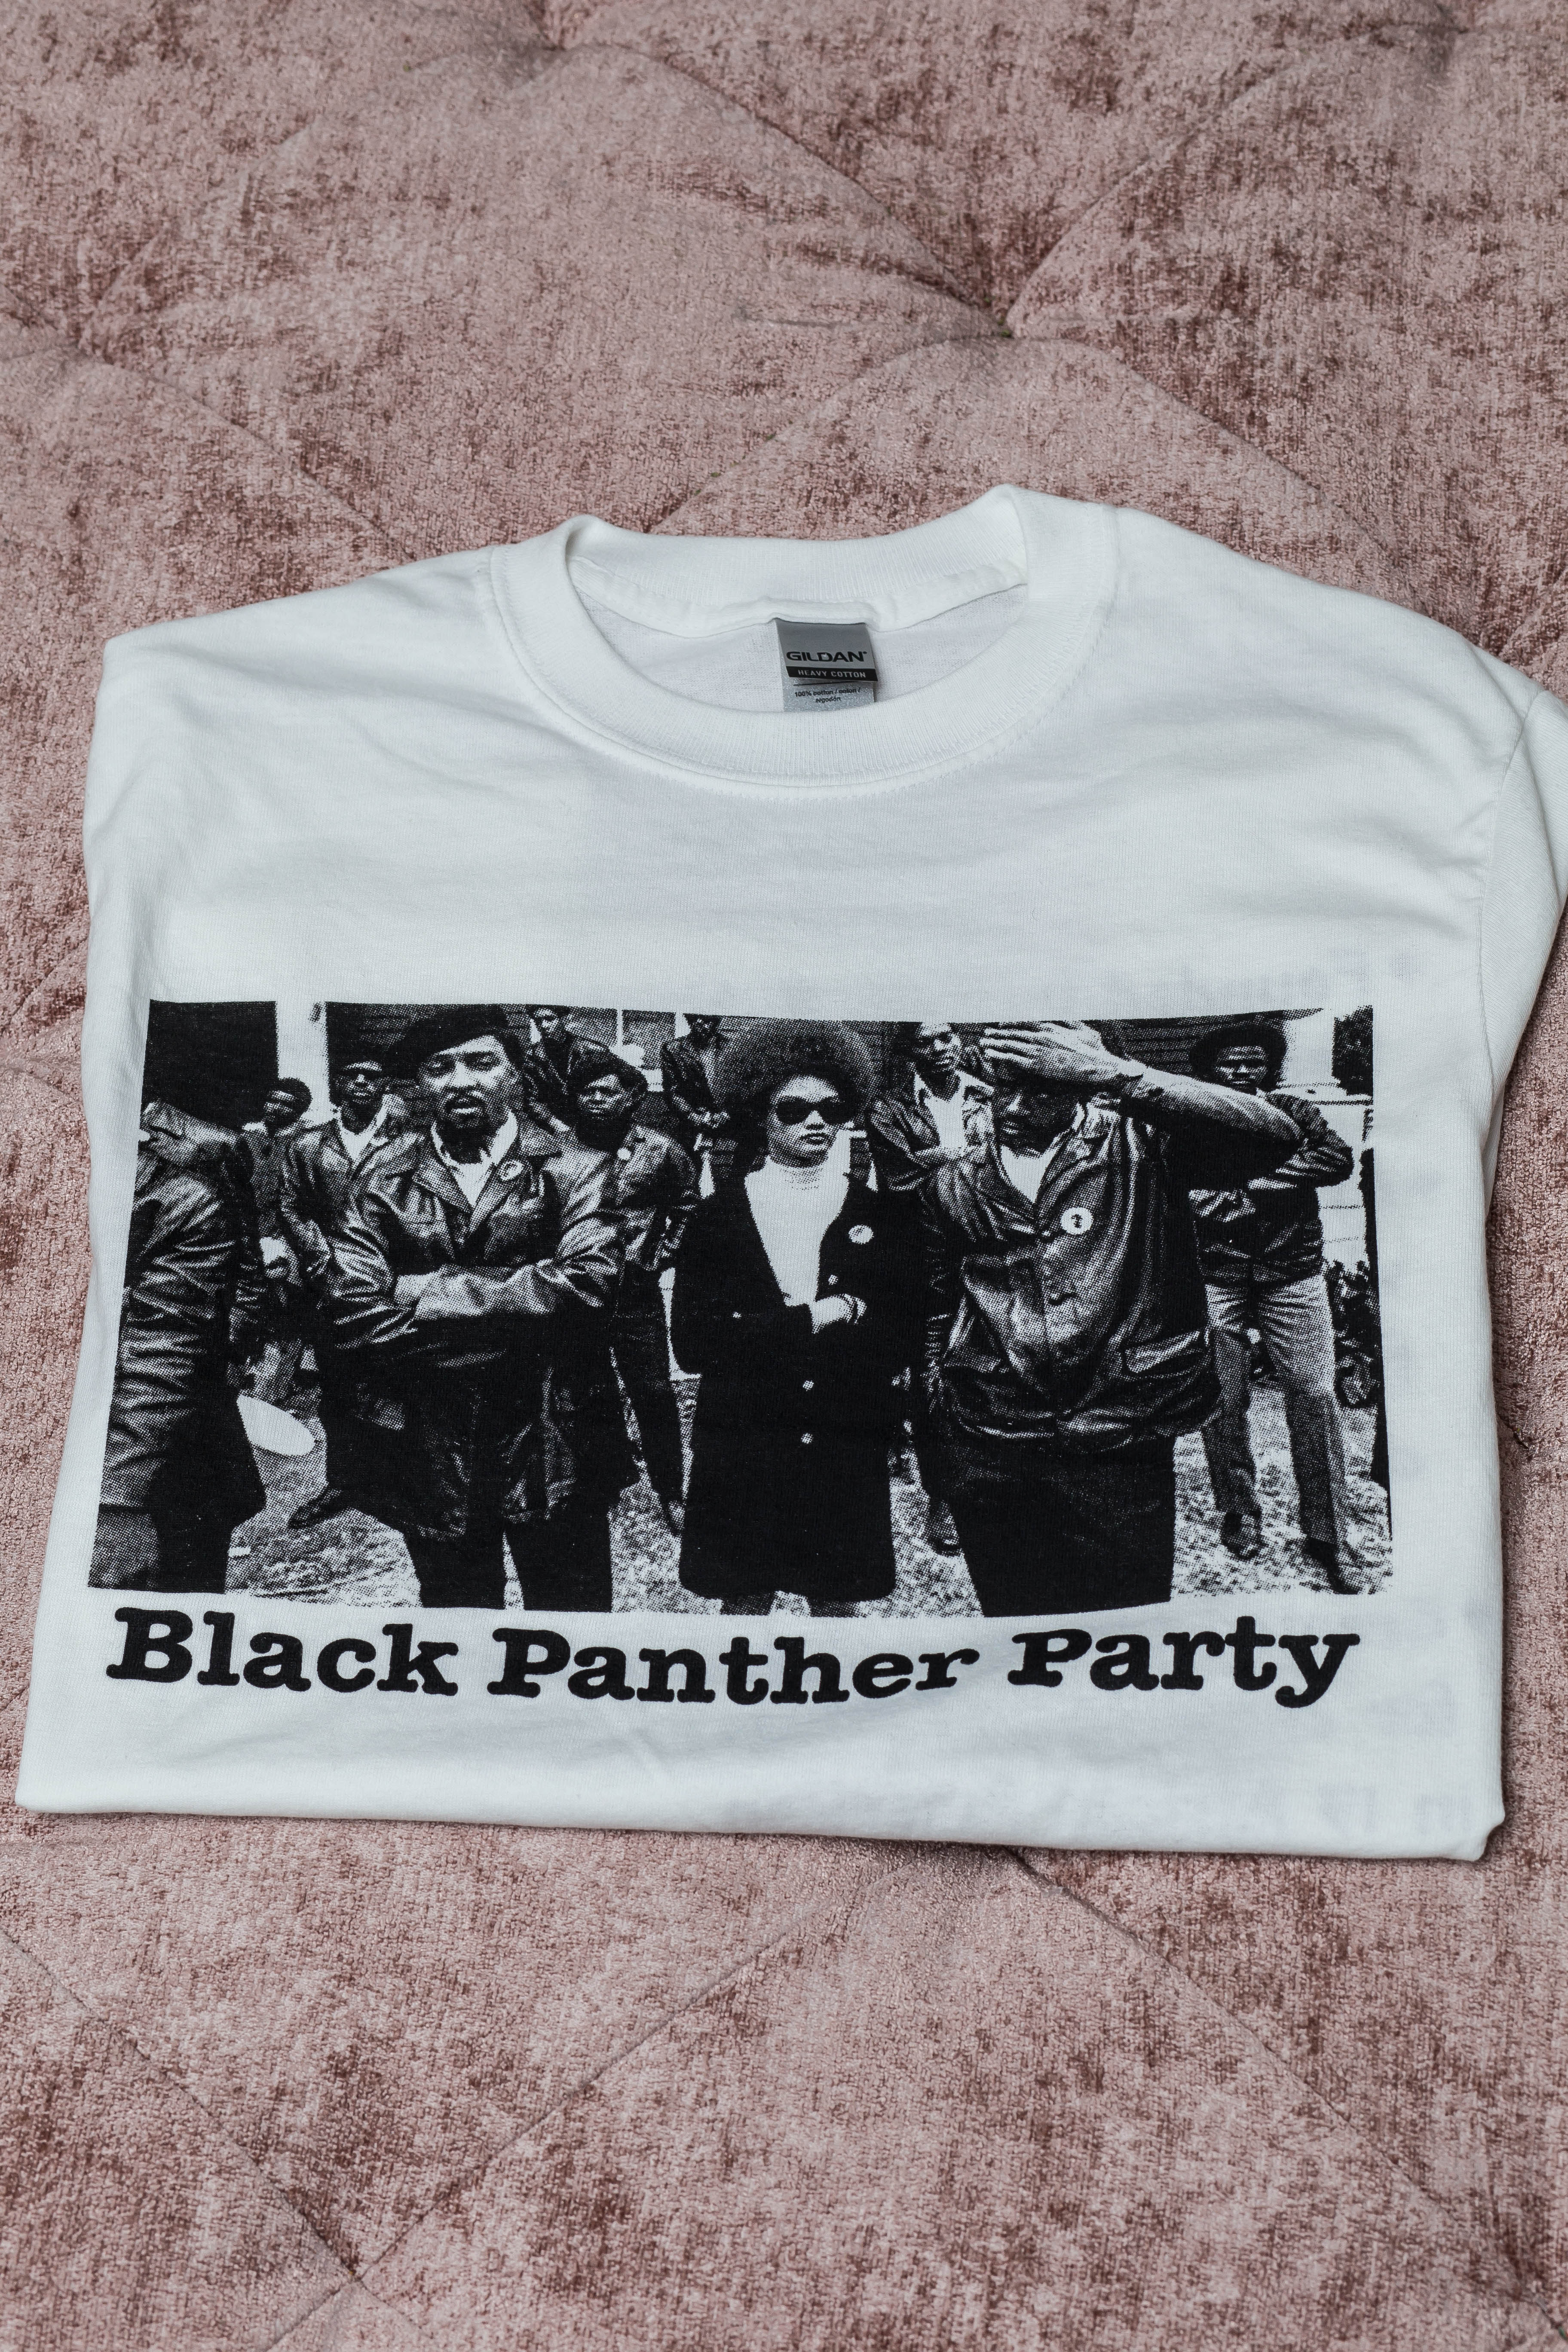 Black Panther Party for Self Defense (ADULTS)